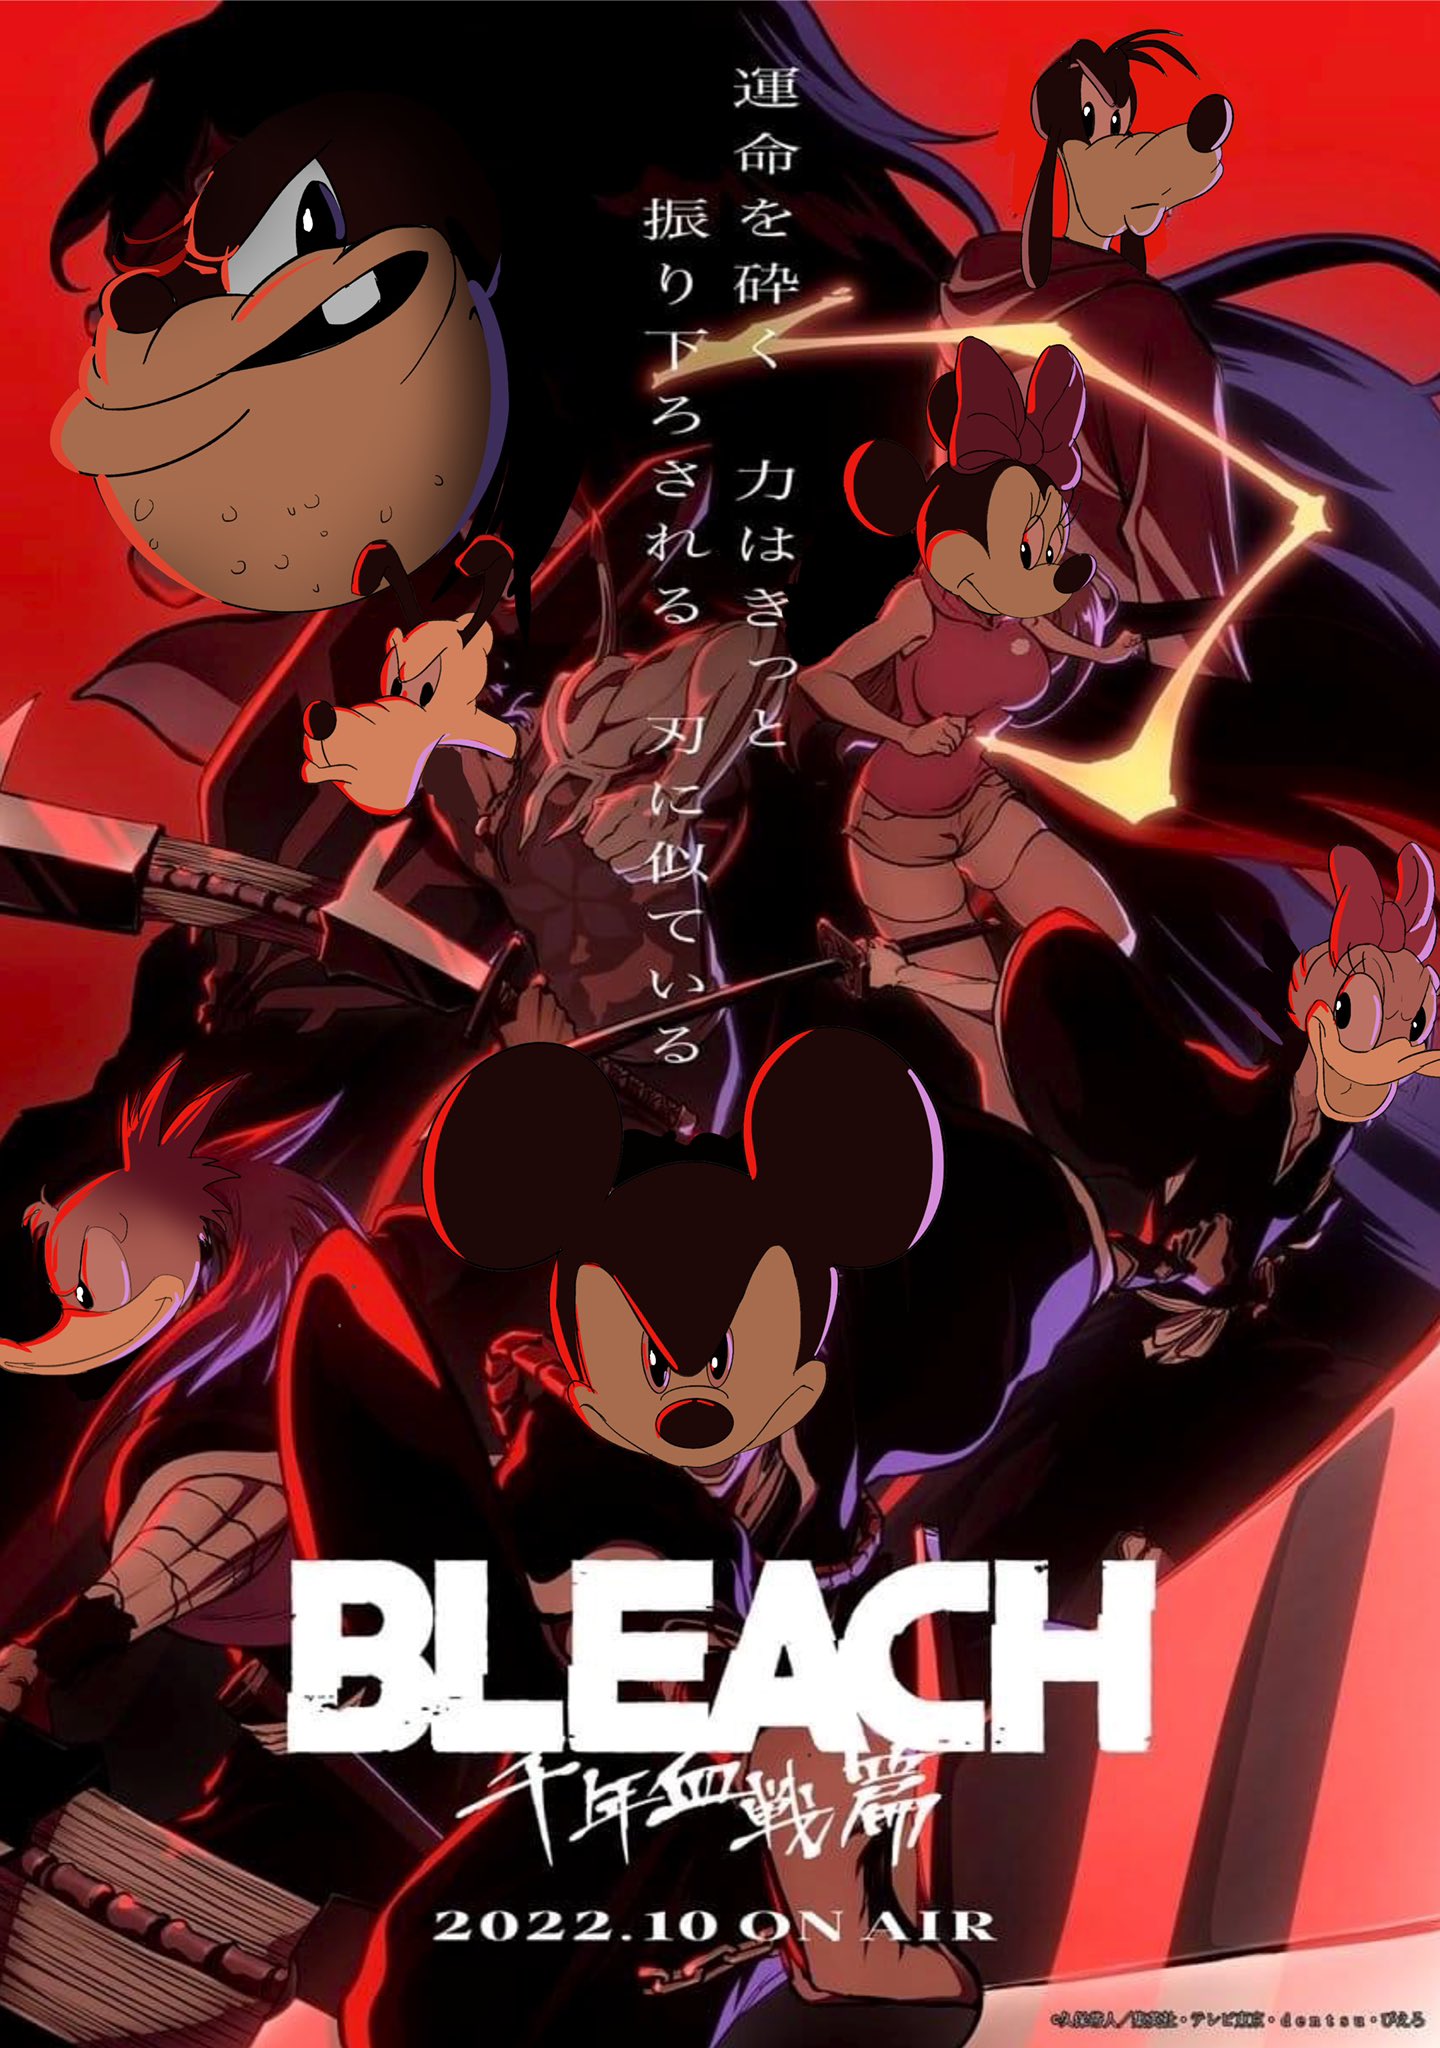 2girls 5boys animal_ears bleach closed_mouth commentary crossover daisy_duck dark_persona dated disney dog donald_duck furry furry_female furry_male goofy highres holding holding_sword holding_weapon interspecies japanese_clothes katana kimono looking_at_viewer mickey_mouse minnie_mouse mouse_ears movie_poster multiple_boys multiple_girls mythallica pete_(disney) pluto_(disney) red_background simple_background sword translation_request twitter_username weapon